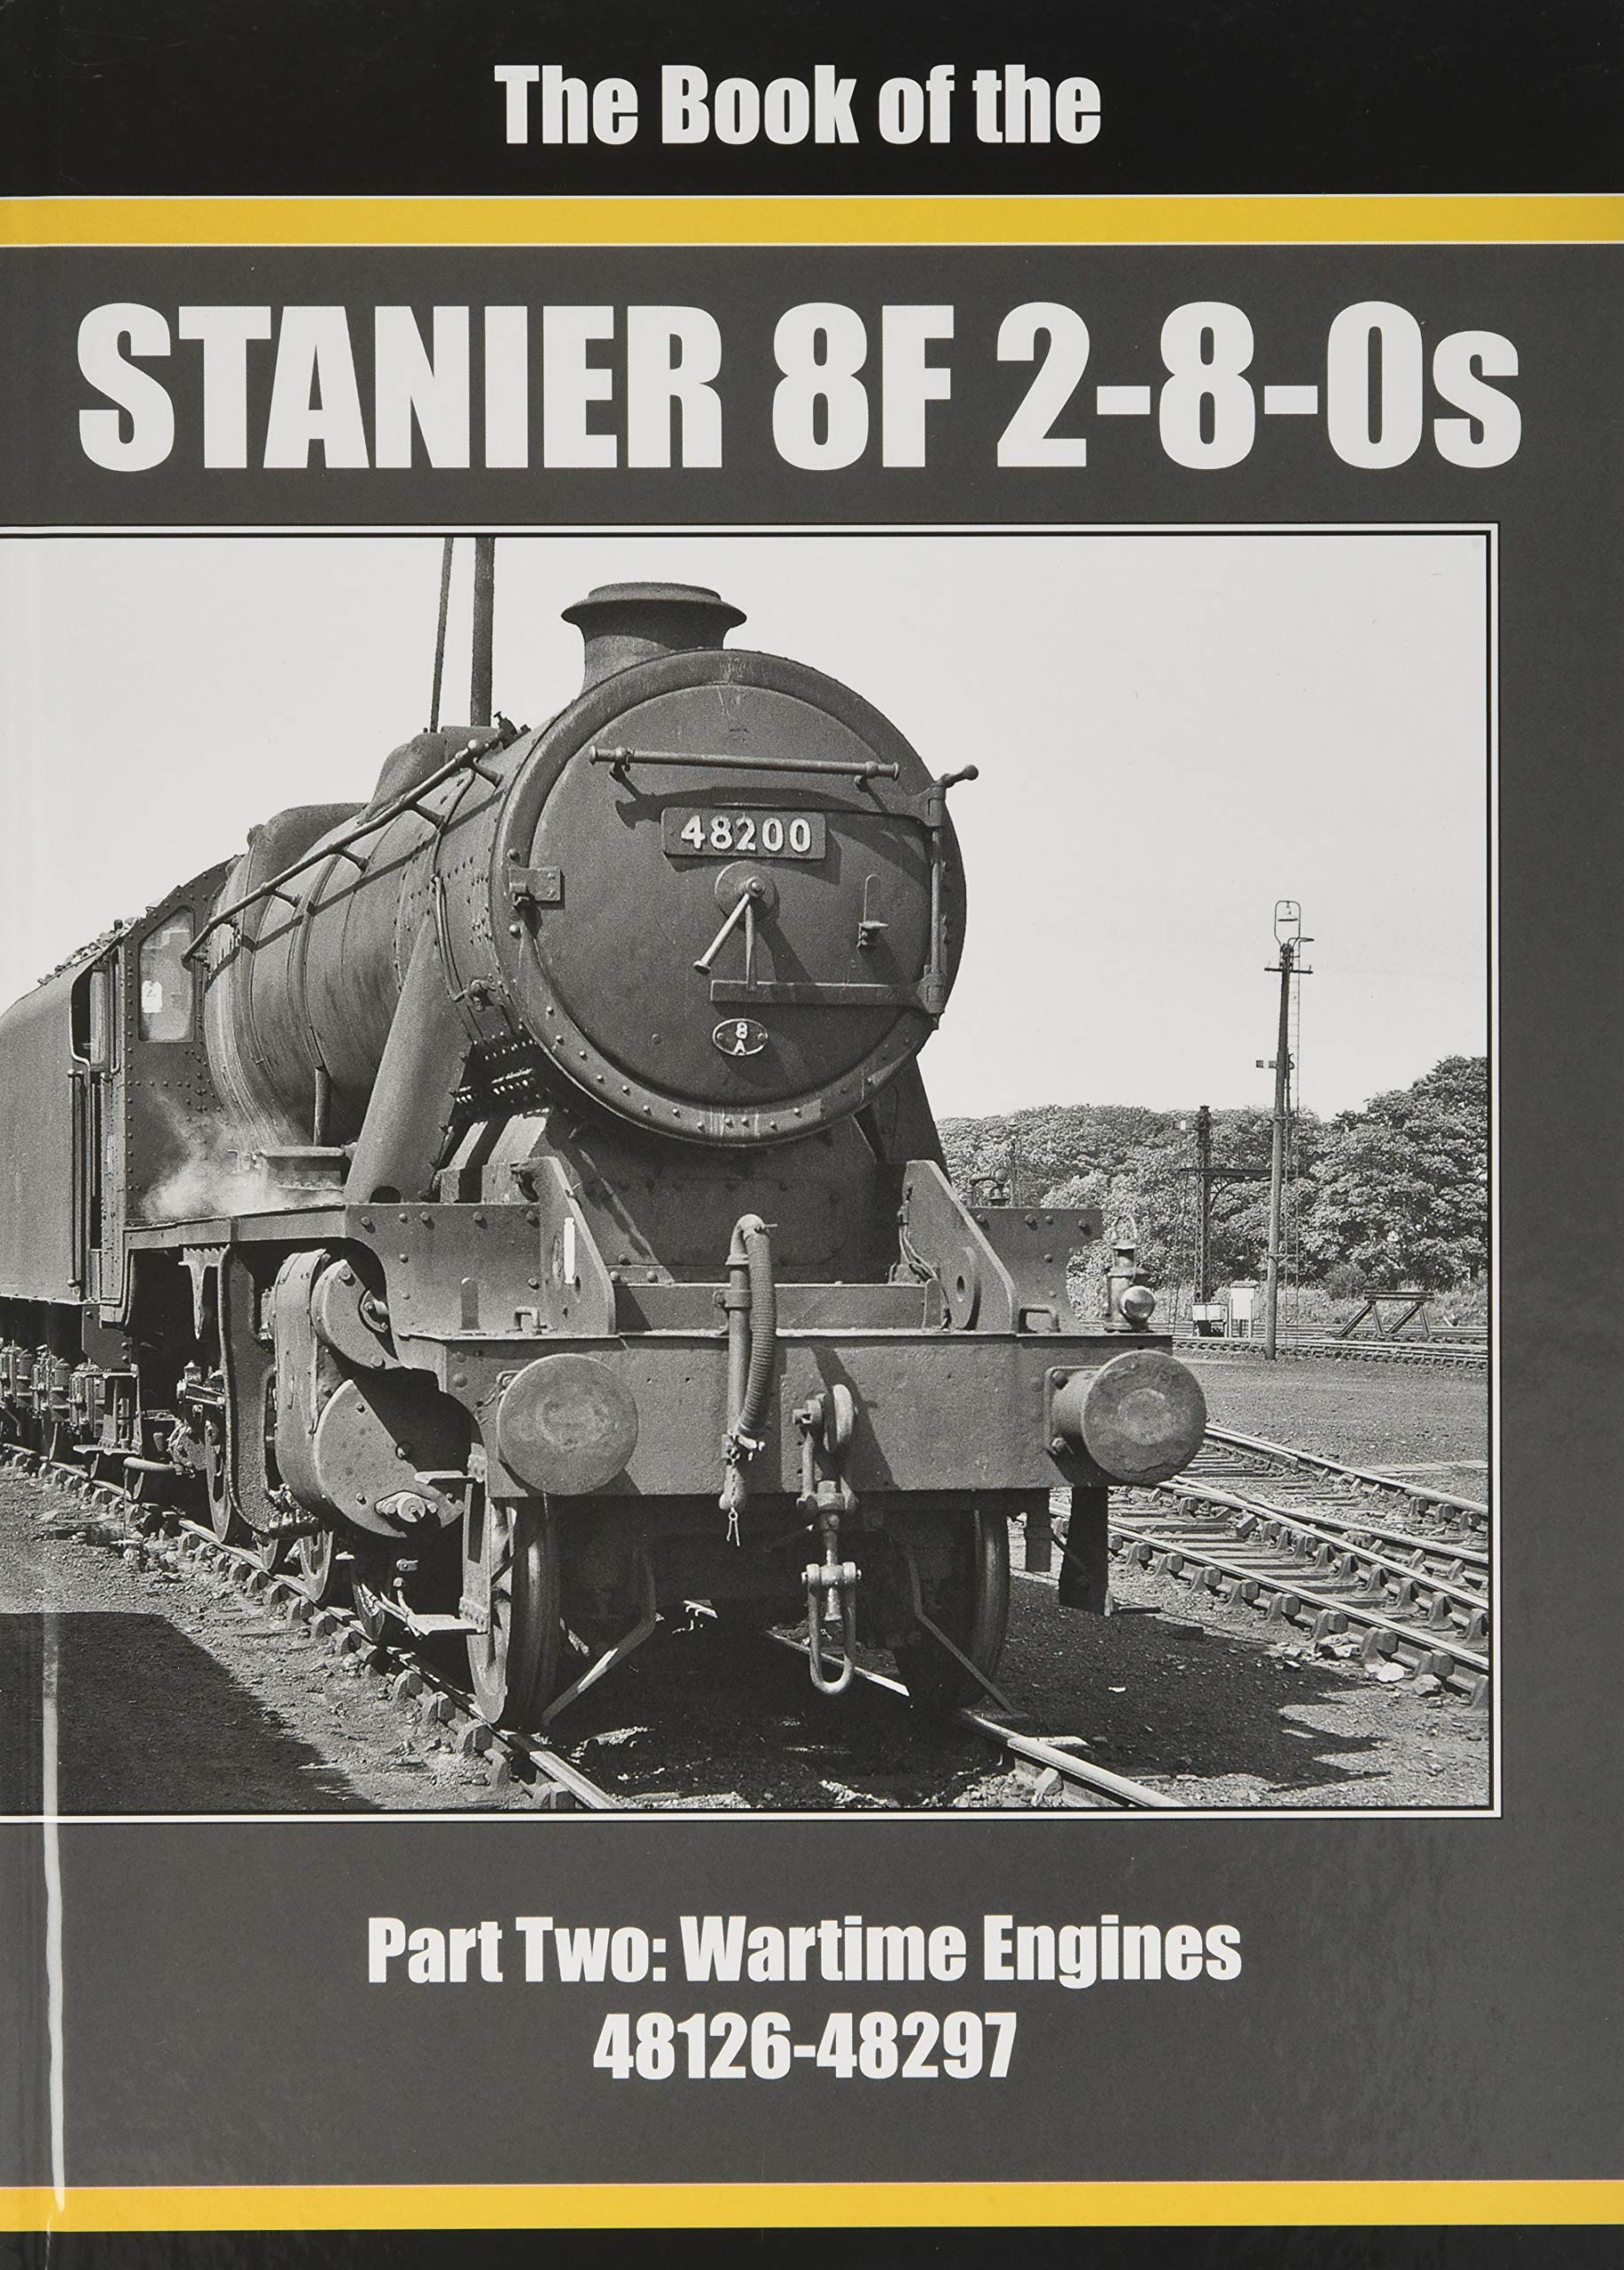 The Book of the STANIER 8F 2-8-0s Part 2: 48126-48297